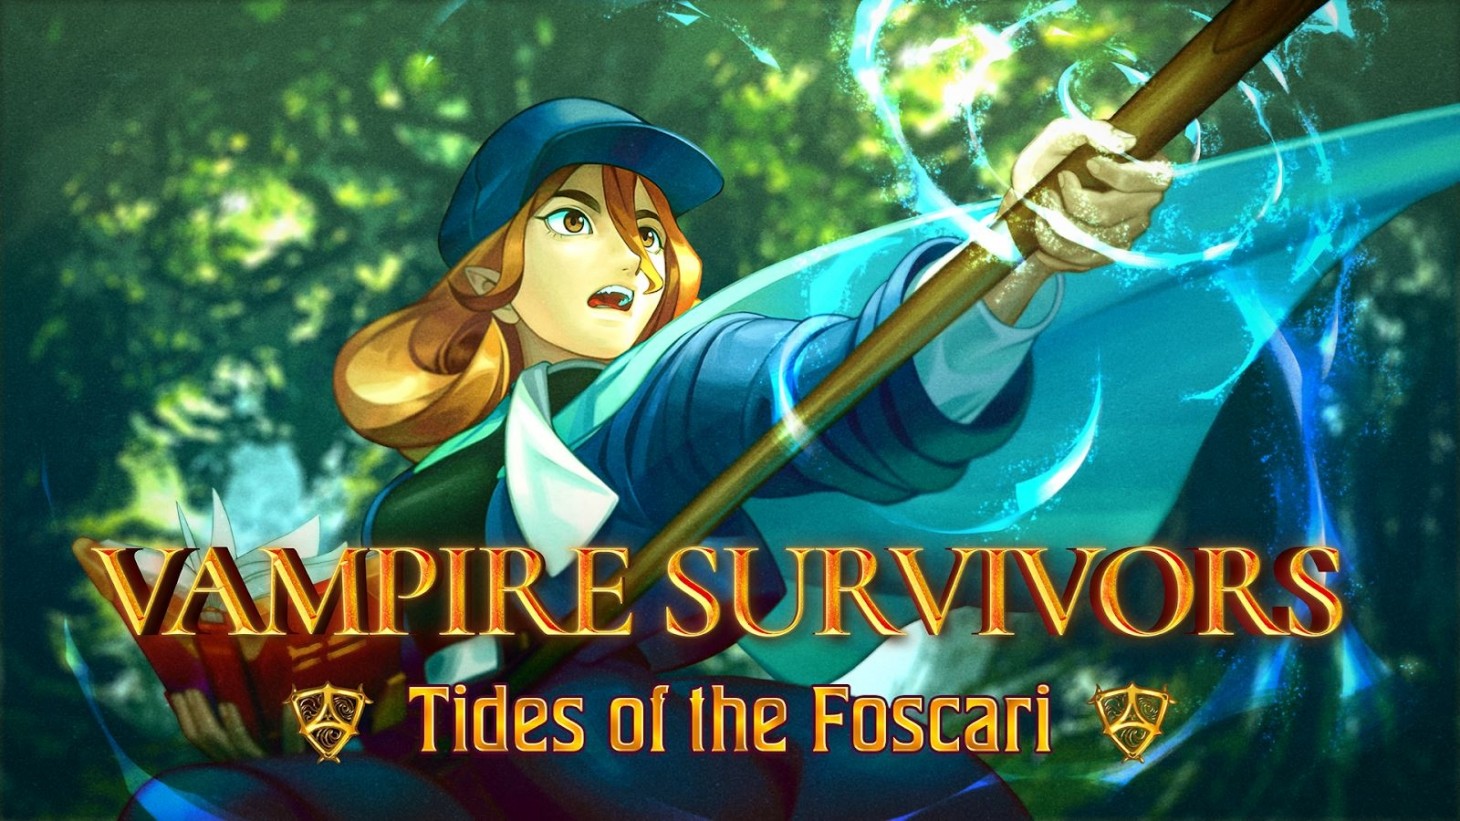 Vampire Survivors will receive a new Tides of the Foscari expansion pack that will cost $2